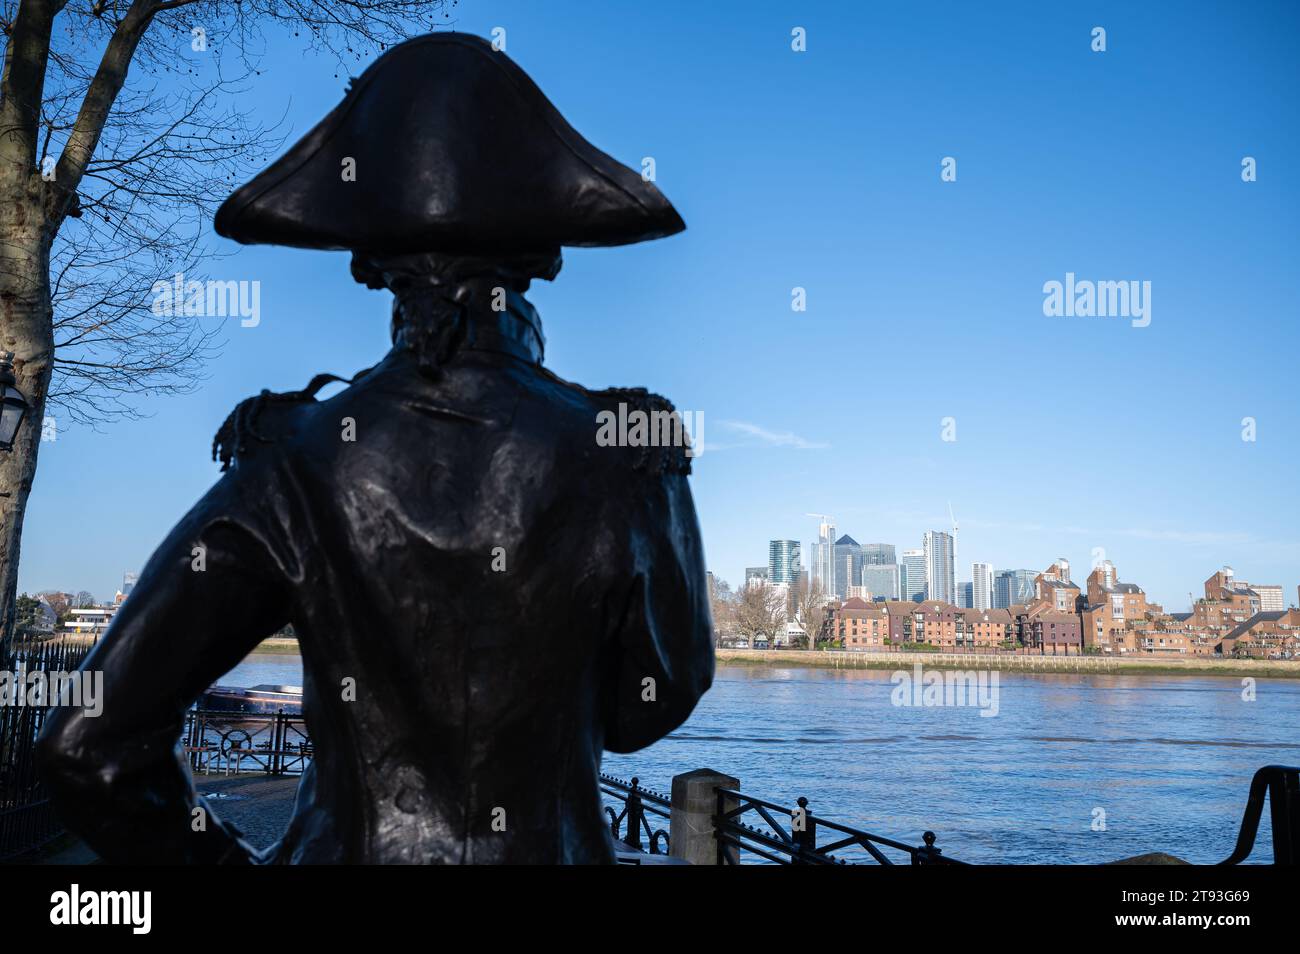 A statue of Admiral Lord Nelson in Greenwich stands looking across the river Thames towards the Docklands area on the Isle of Dogs, London, UK Stock Photo